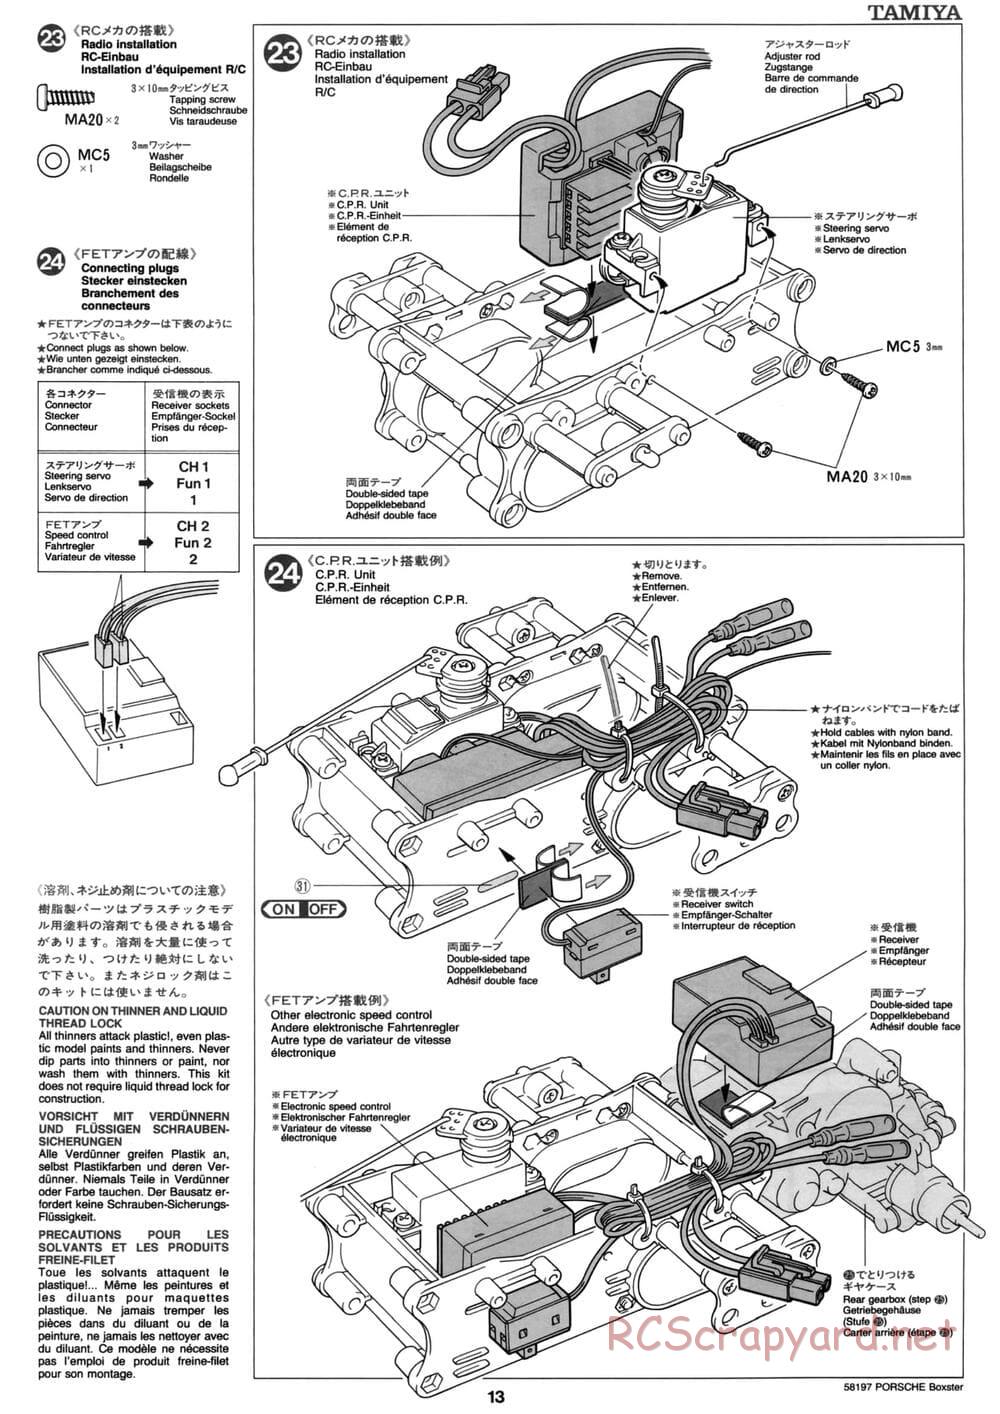 Tamiya - Porsche Boxster - M02L Chassis - Manual - Page 13